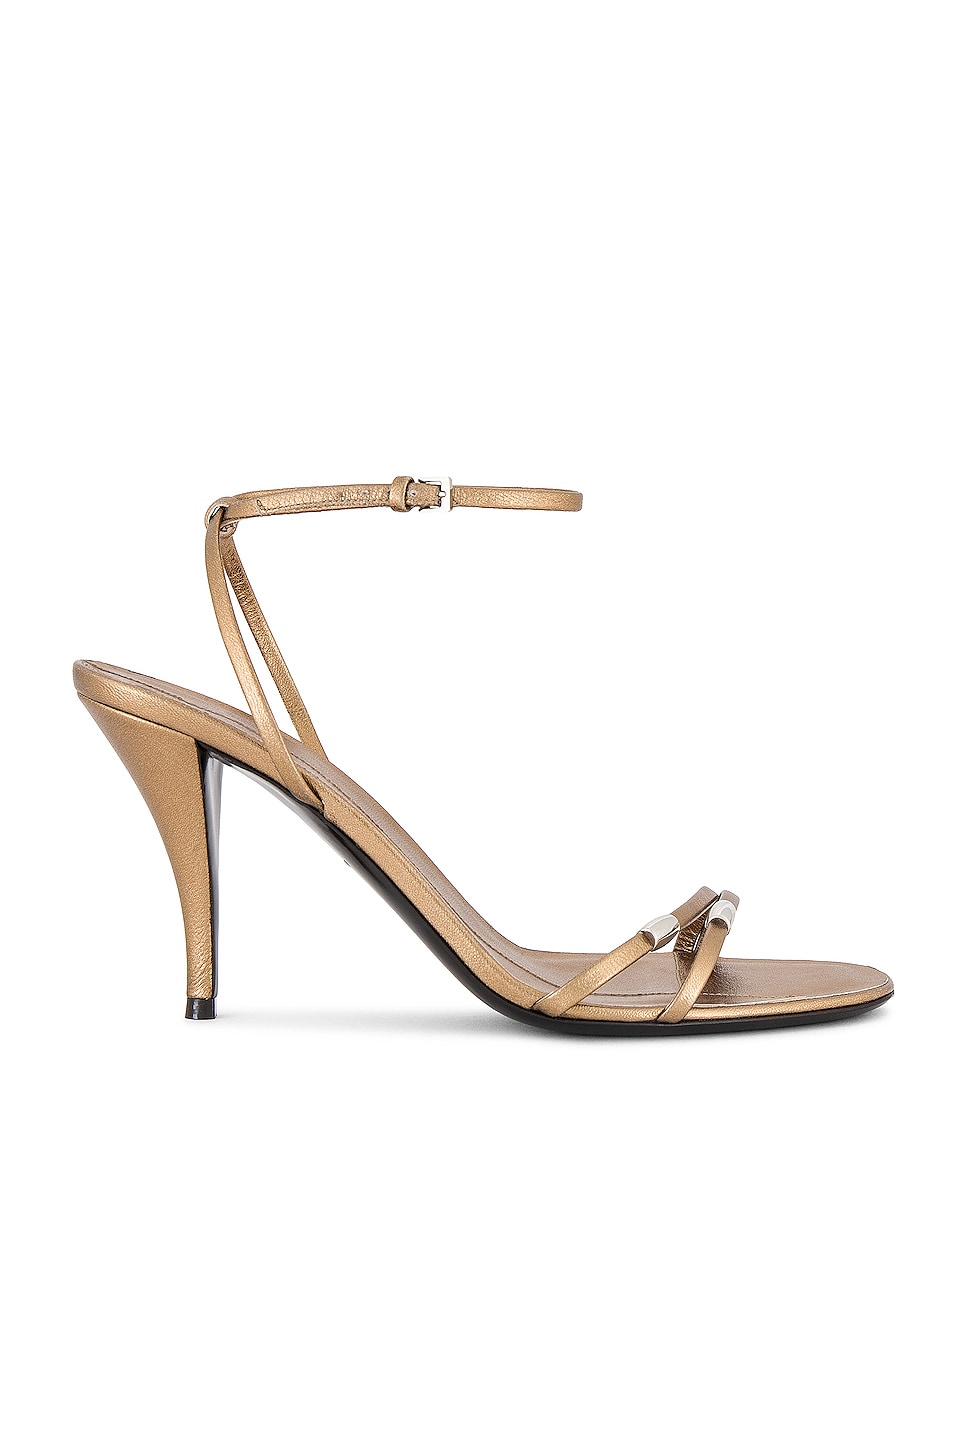 Image 1 of The Row Cleo Bijoux Sandal in Old Gold & Silver